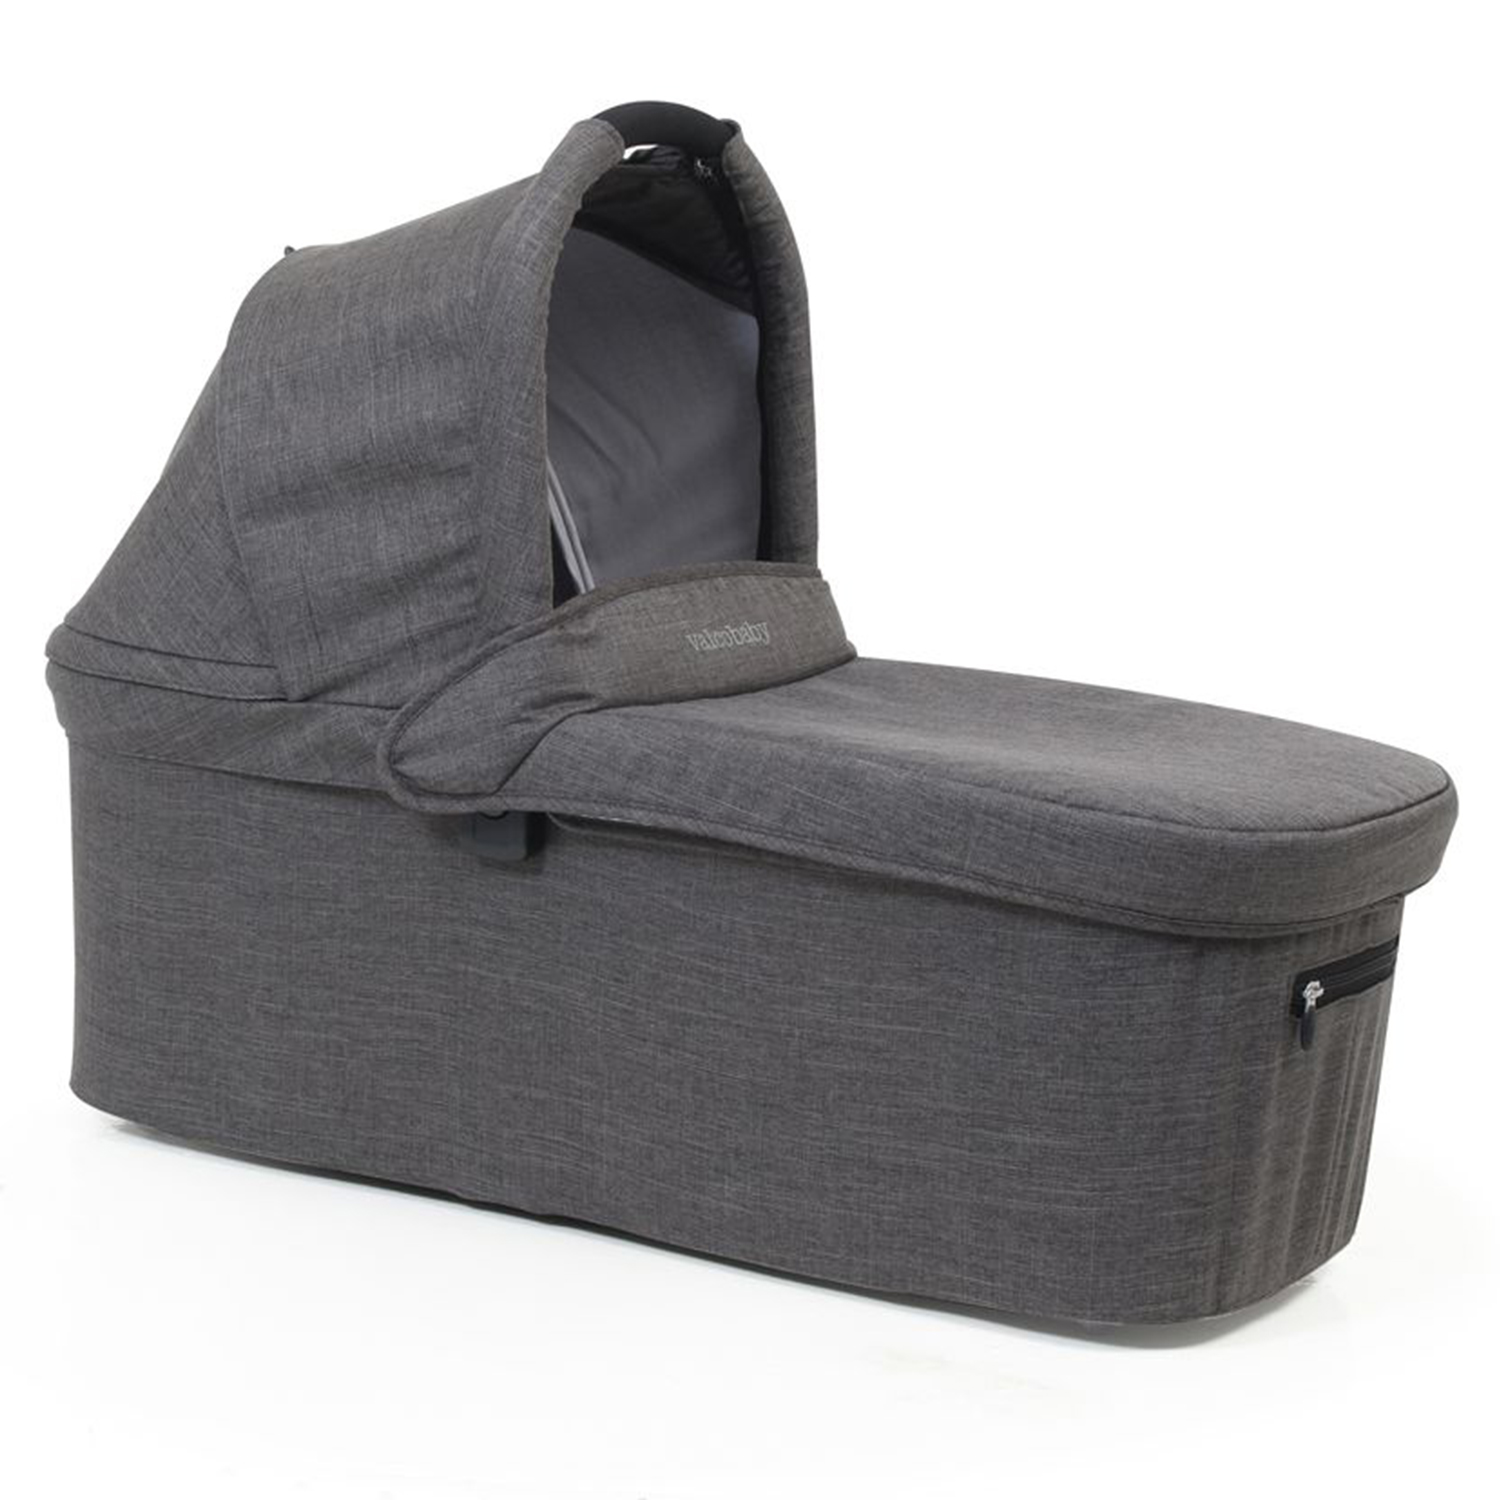 Люлька External Bassinet для Snap Duo Trend / Charcoal Valco Baby люлька external bassinet для snap trend snap 4 trend snap 4 ultra trend grey marle valco baby